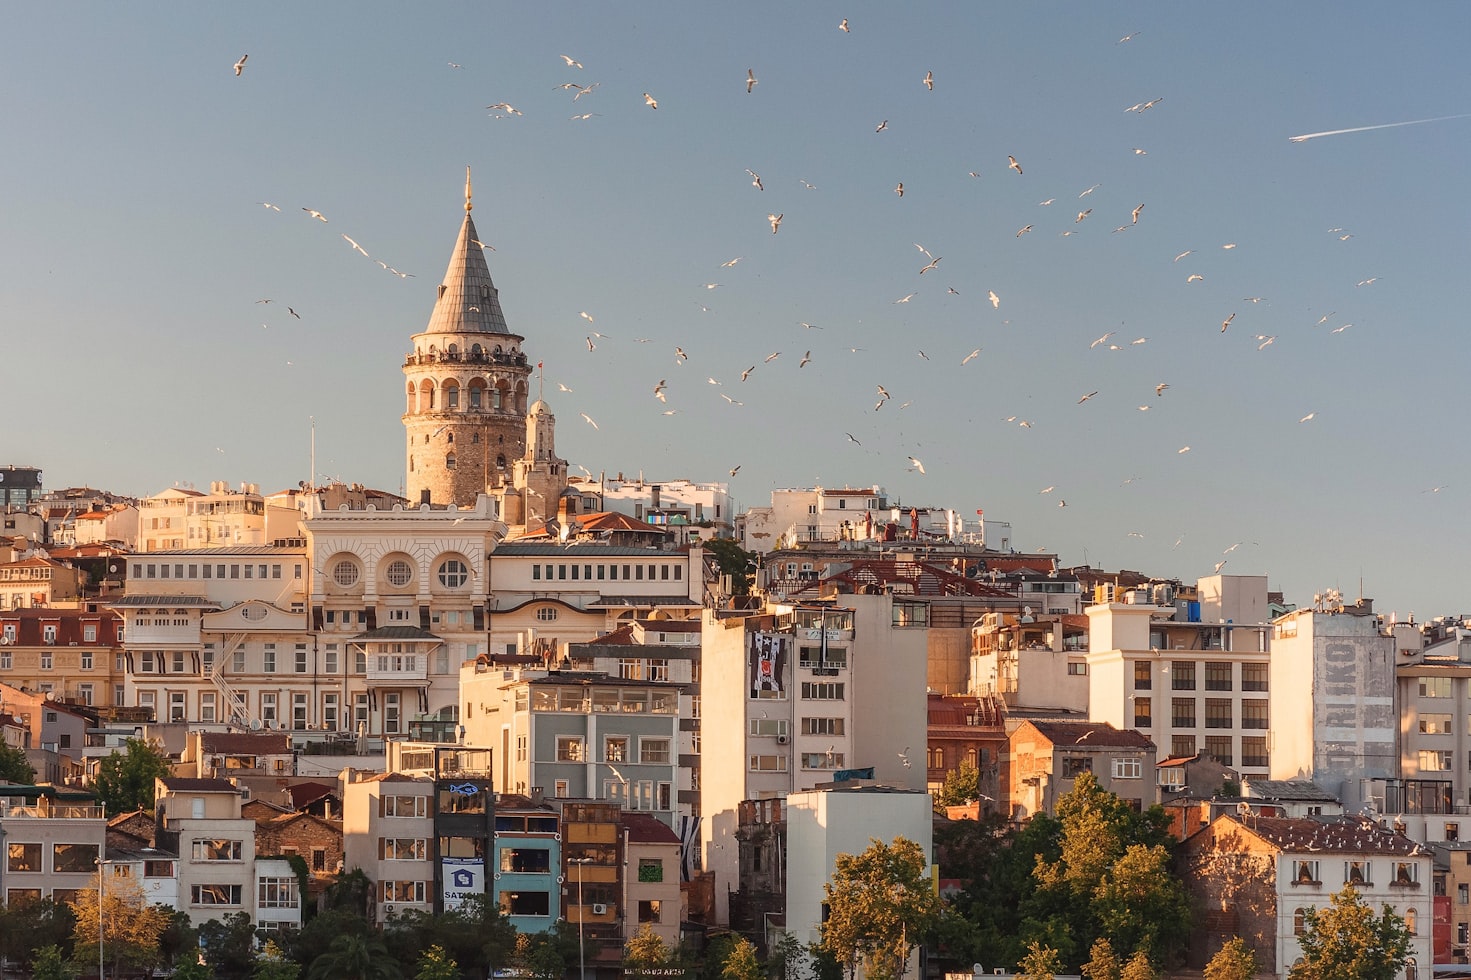 Turkey Travel Guide - Attractions, What to See, Do, Costs, FAQs